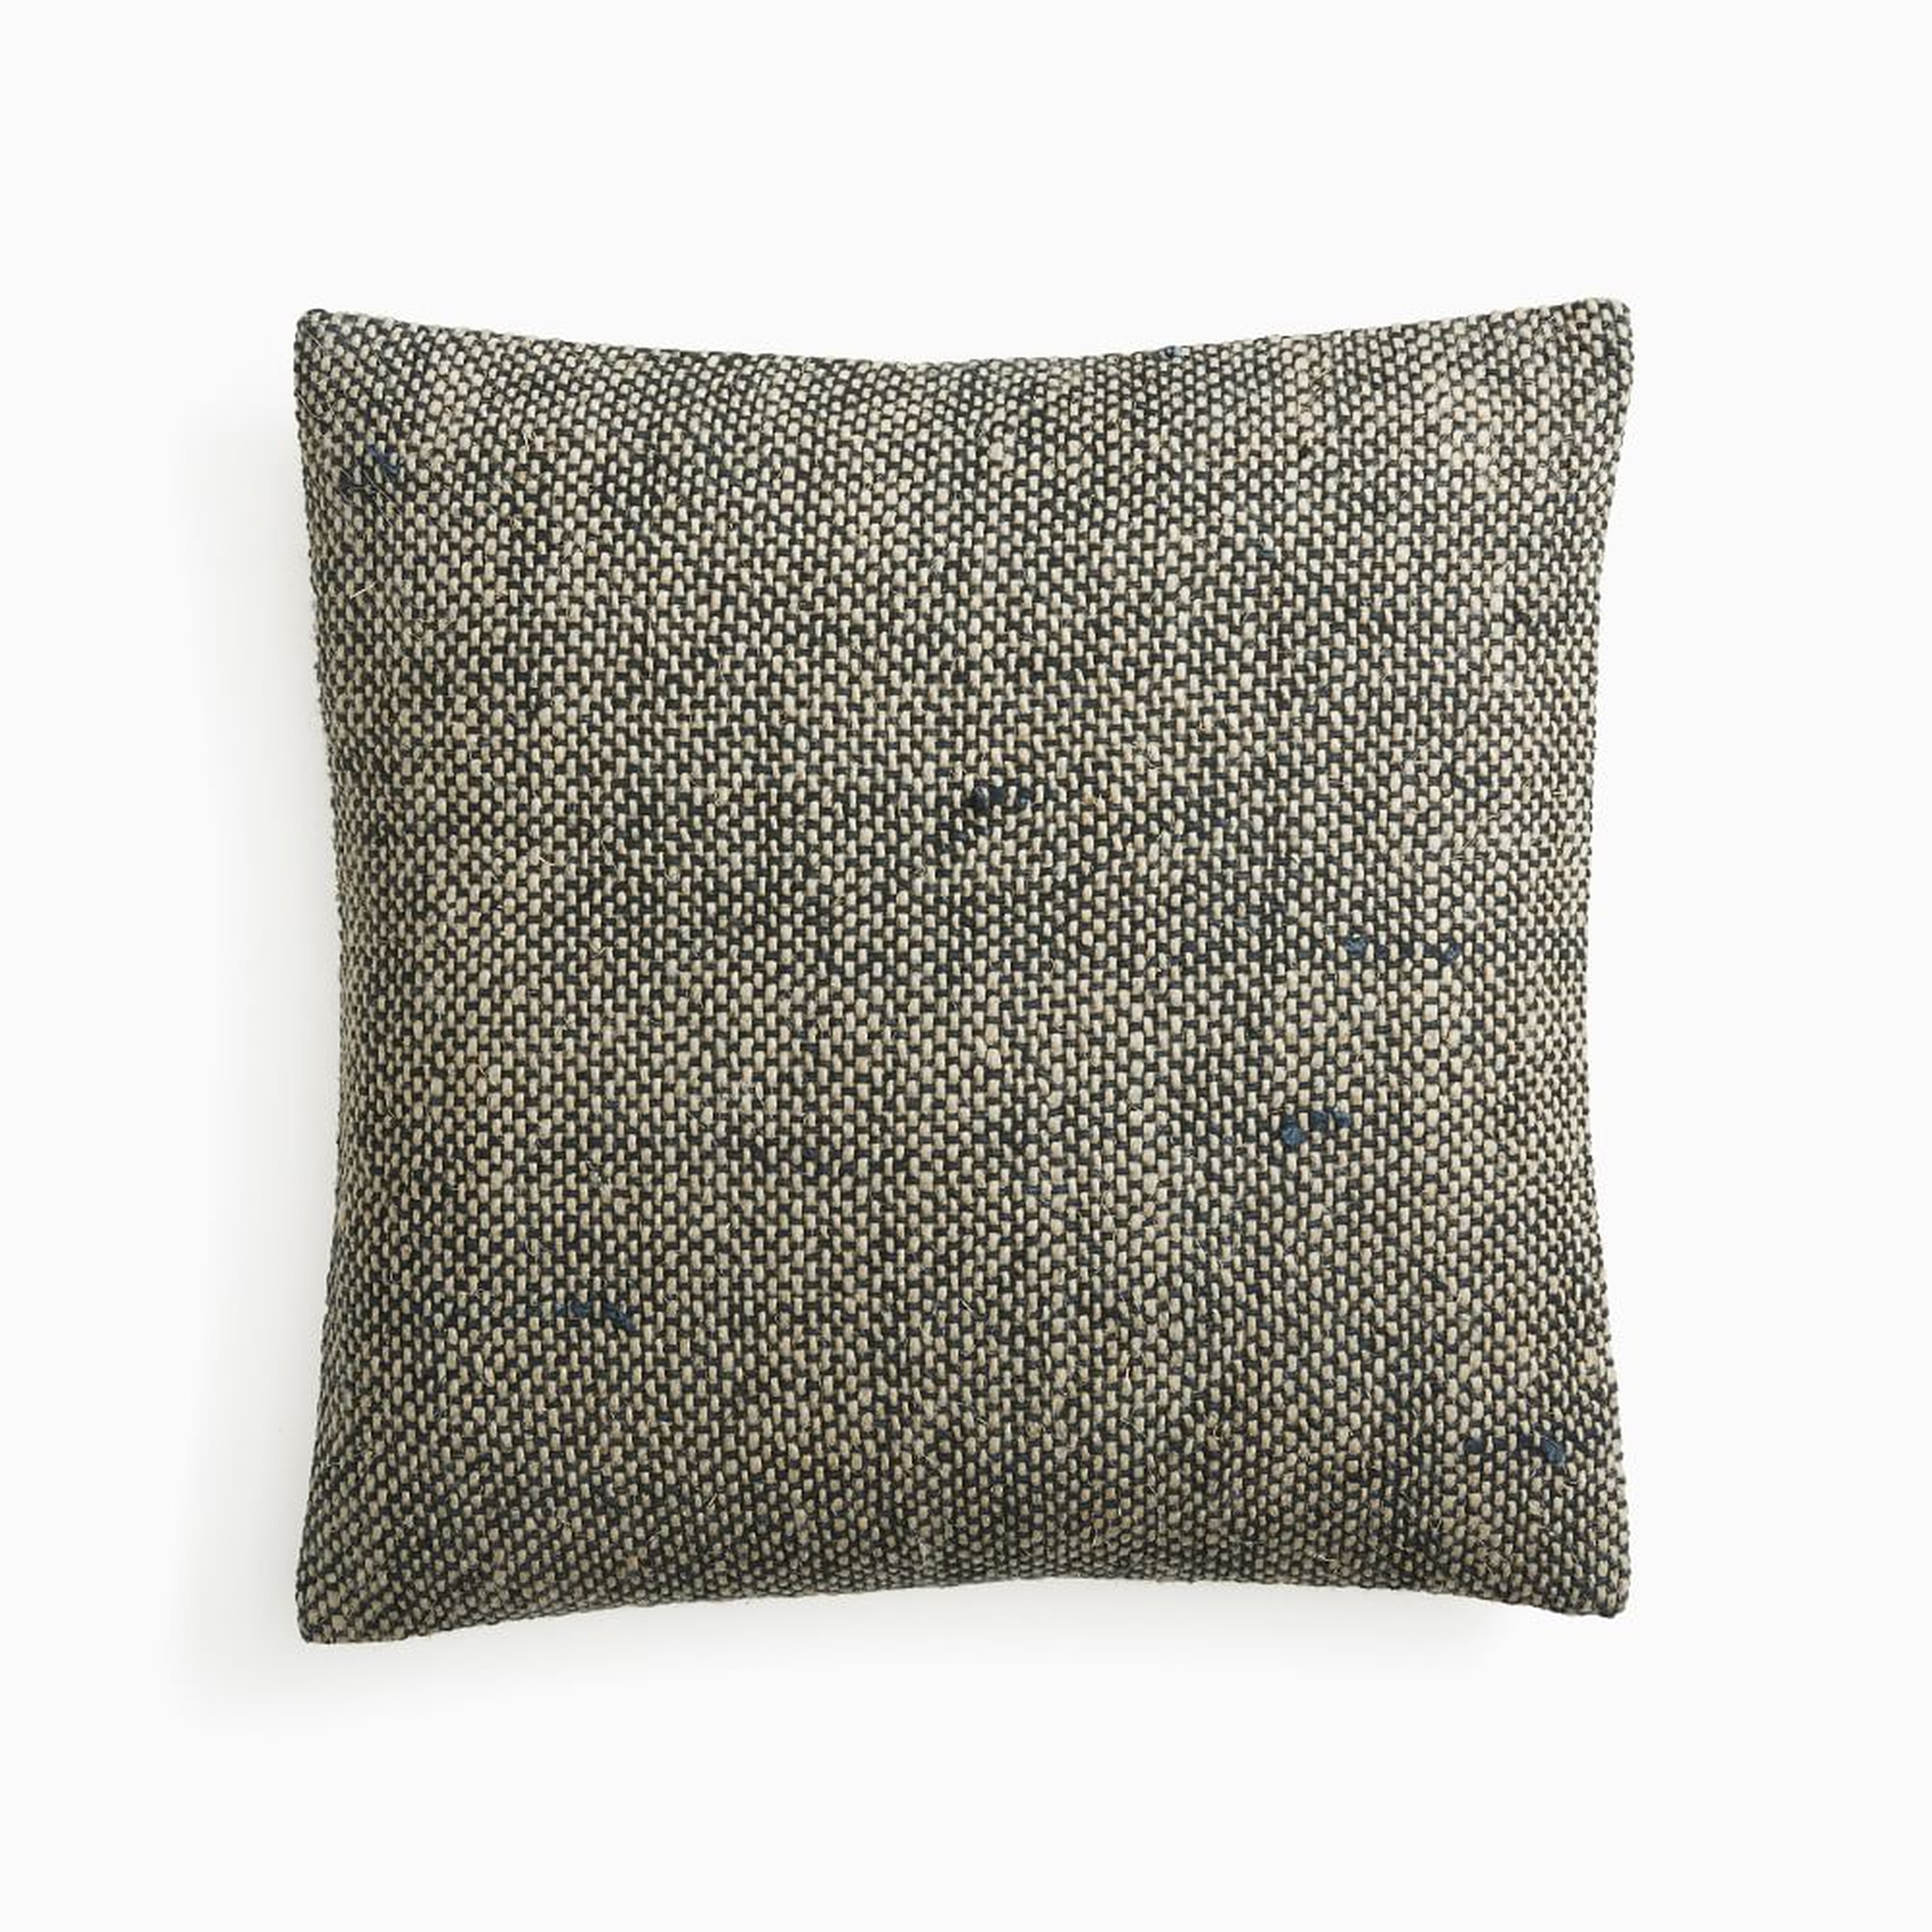 Two Tone Chunky Linen Pillow Cover, 20"x20", Black - West Elm